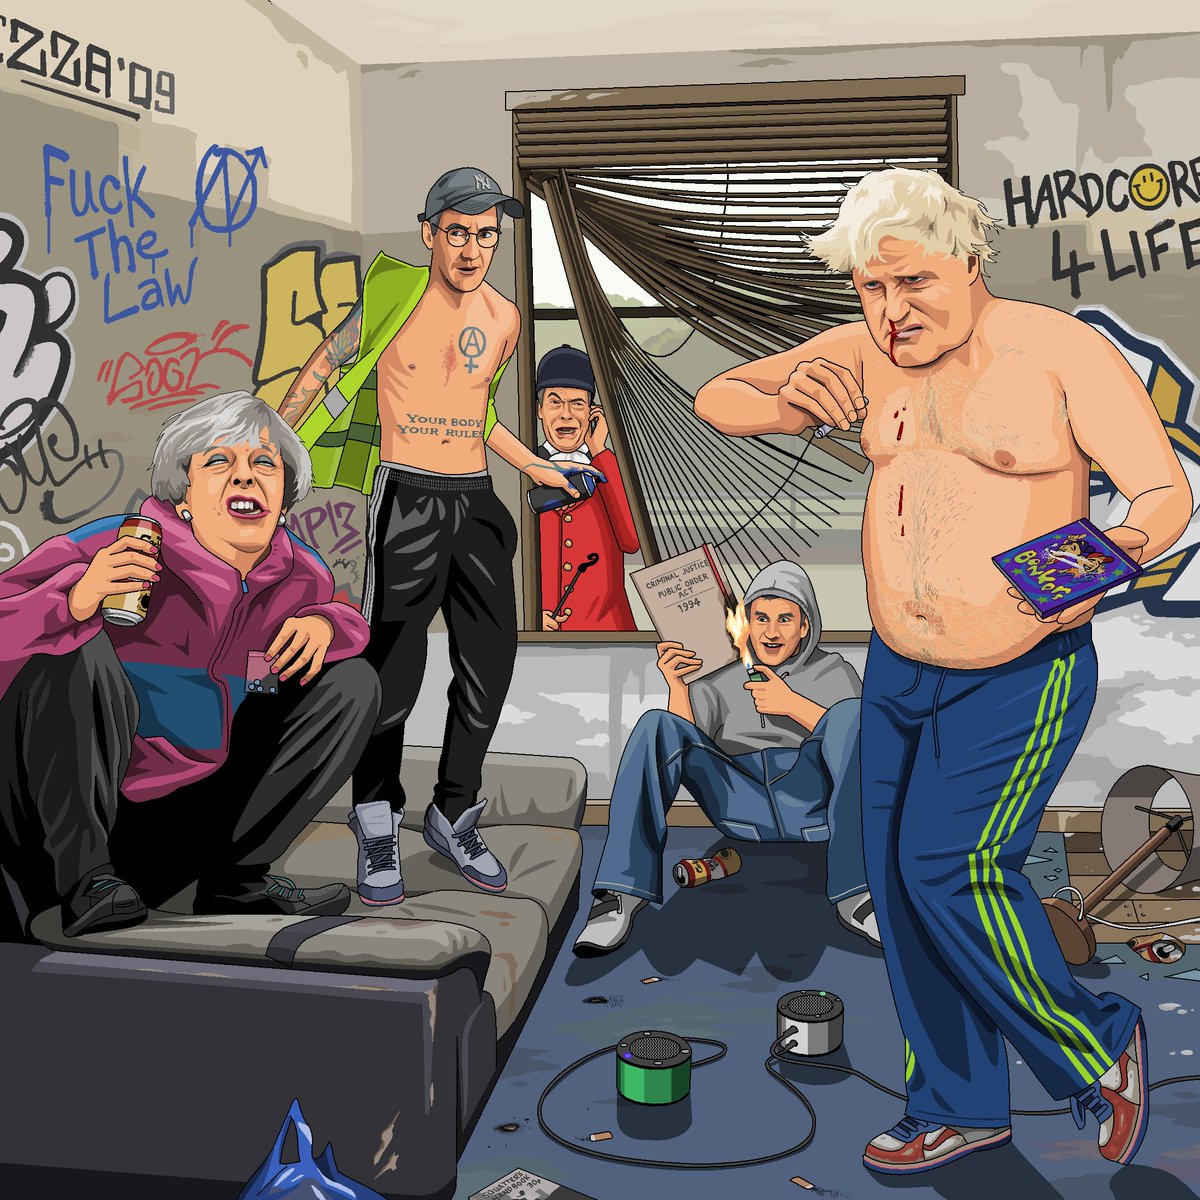 'Tory squat party. Boris has a nosebleed from snorting too much speed, May is drinking special brew and Hunt is burning the Criminal Justice Bill while Farage, in full hunting gear, is calling the police.' Requested by Matt Durstan Tilke